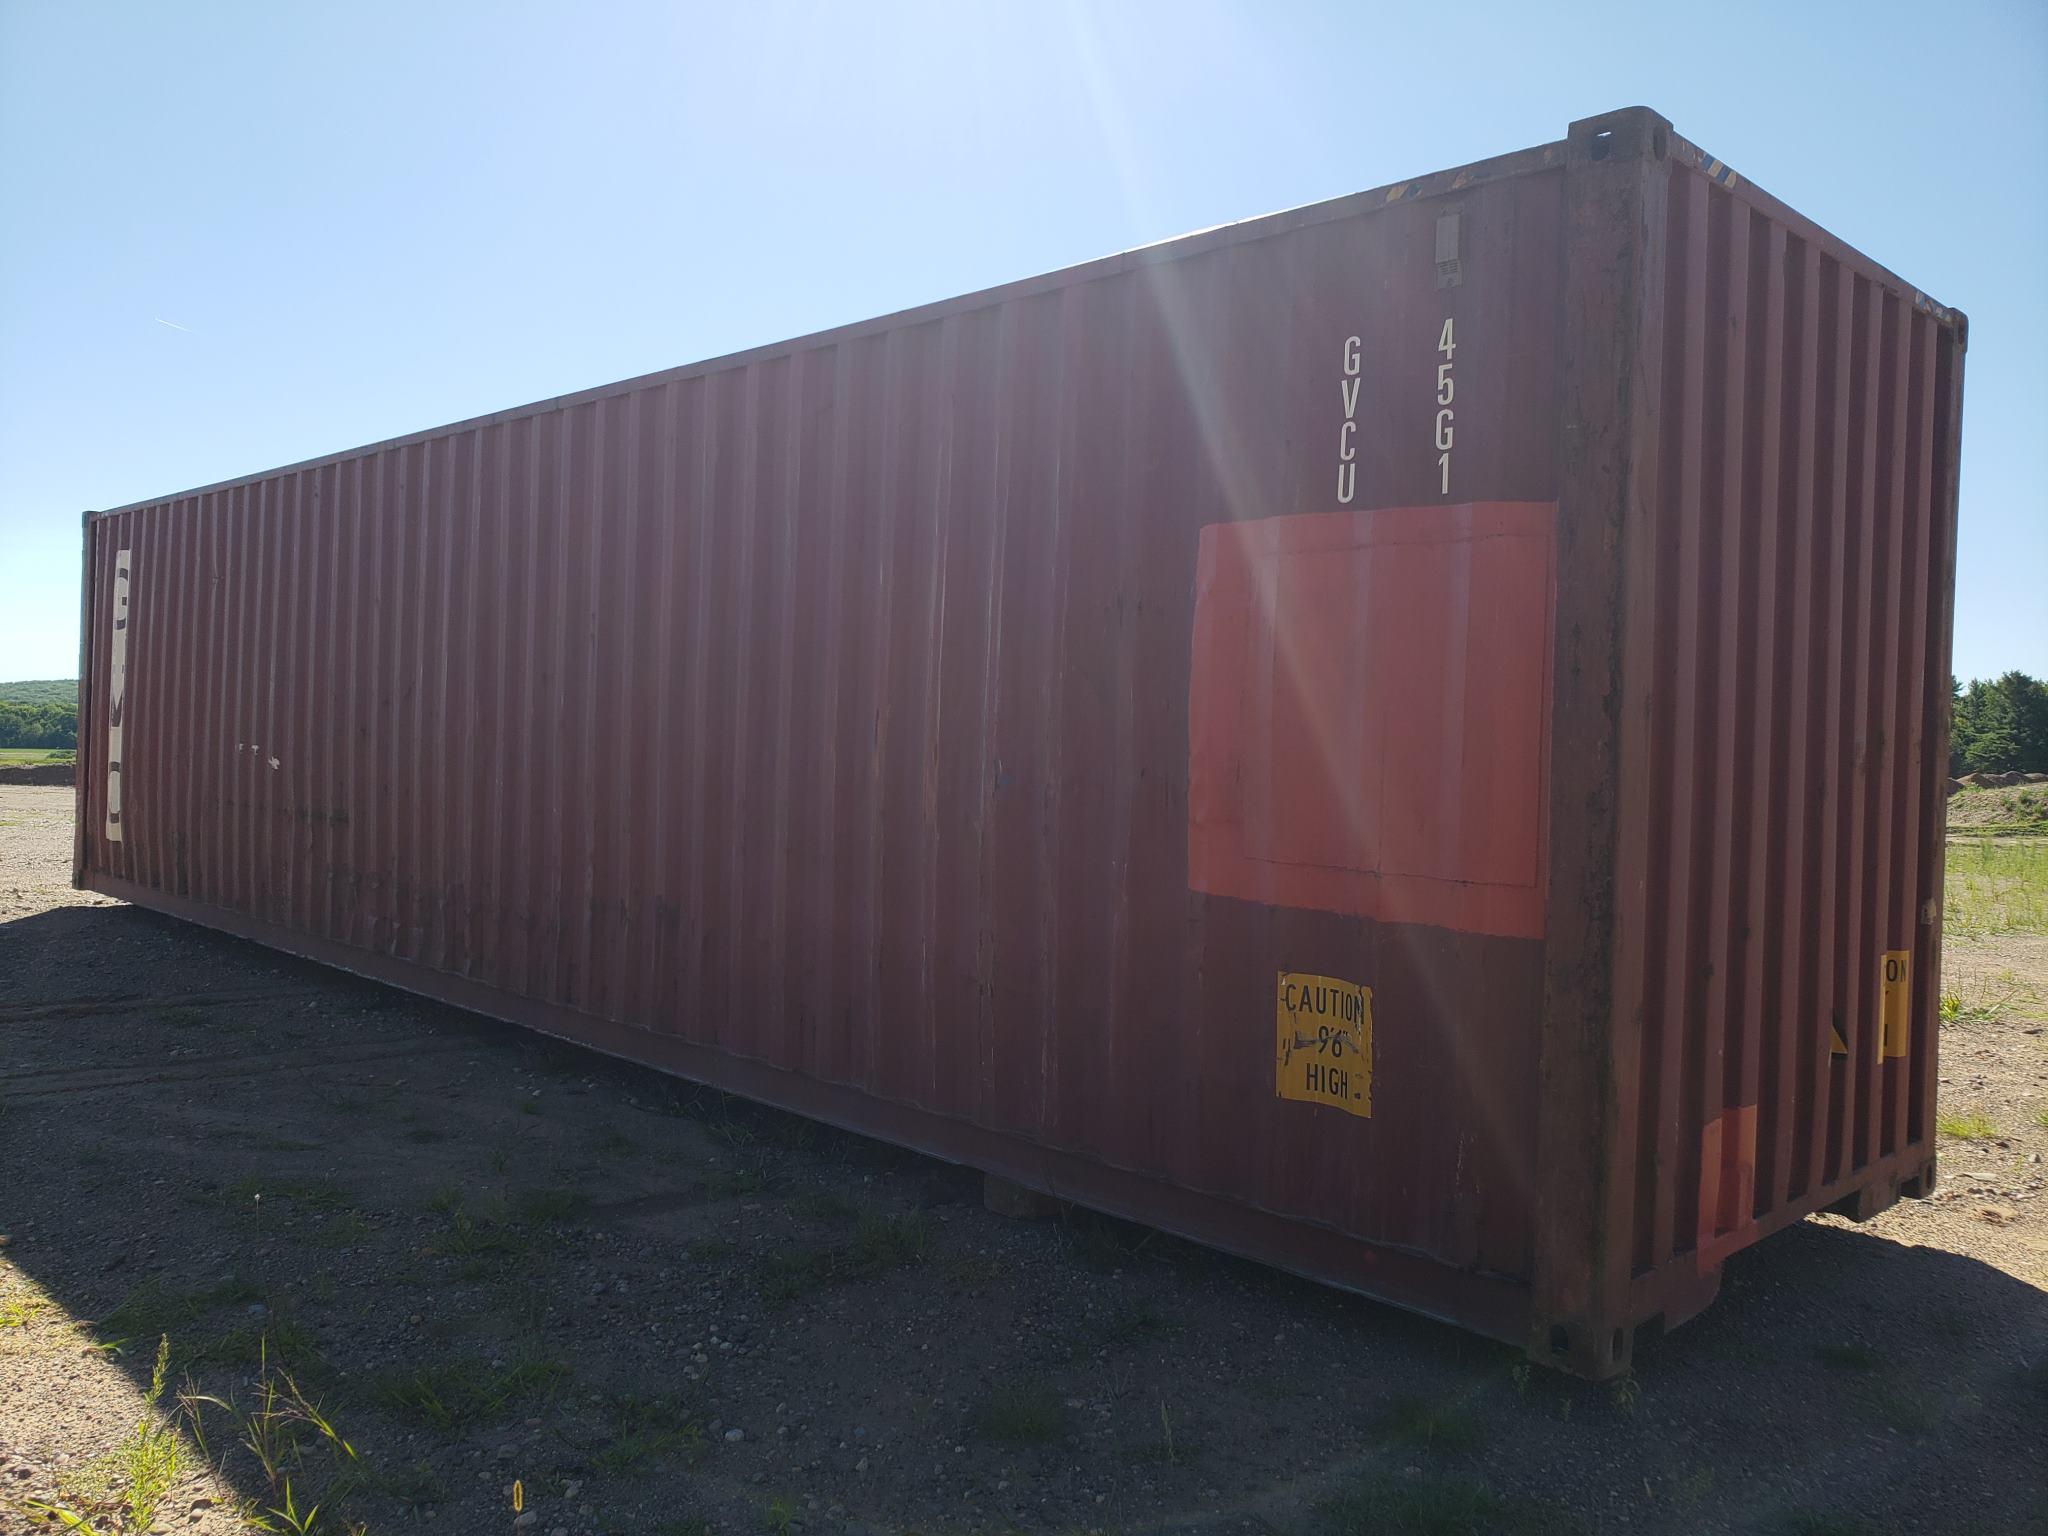 40' Long X 9'6" High X 8' Wide Shipping Container